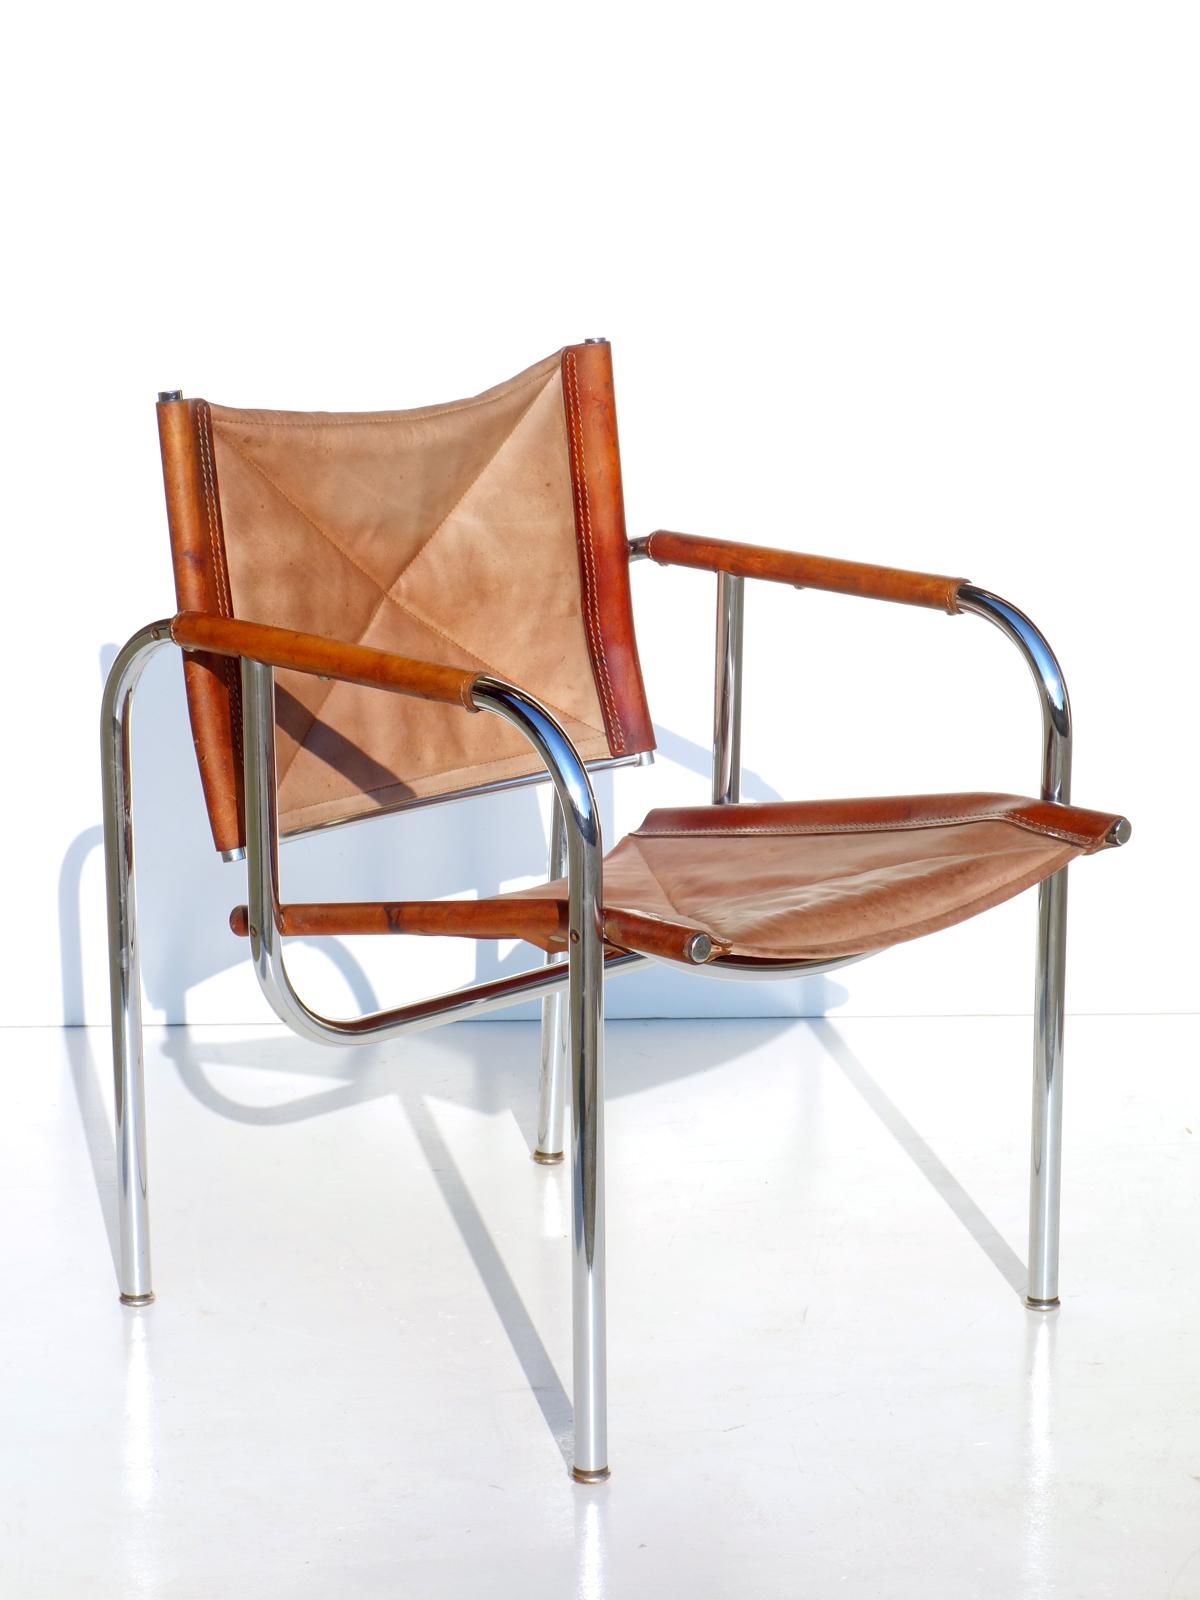 Leather and tubular steel
Adjustable-back

Pair of chairs by Hans Eichenberger for Strässle.